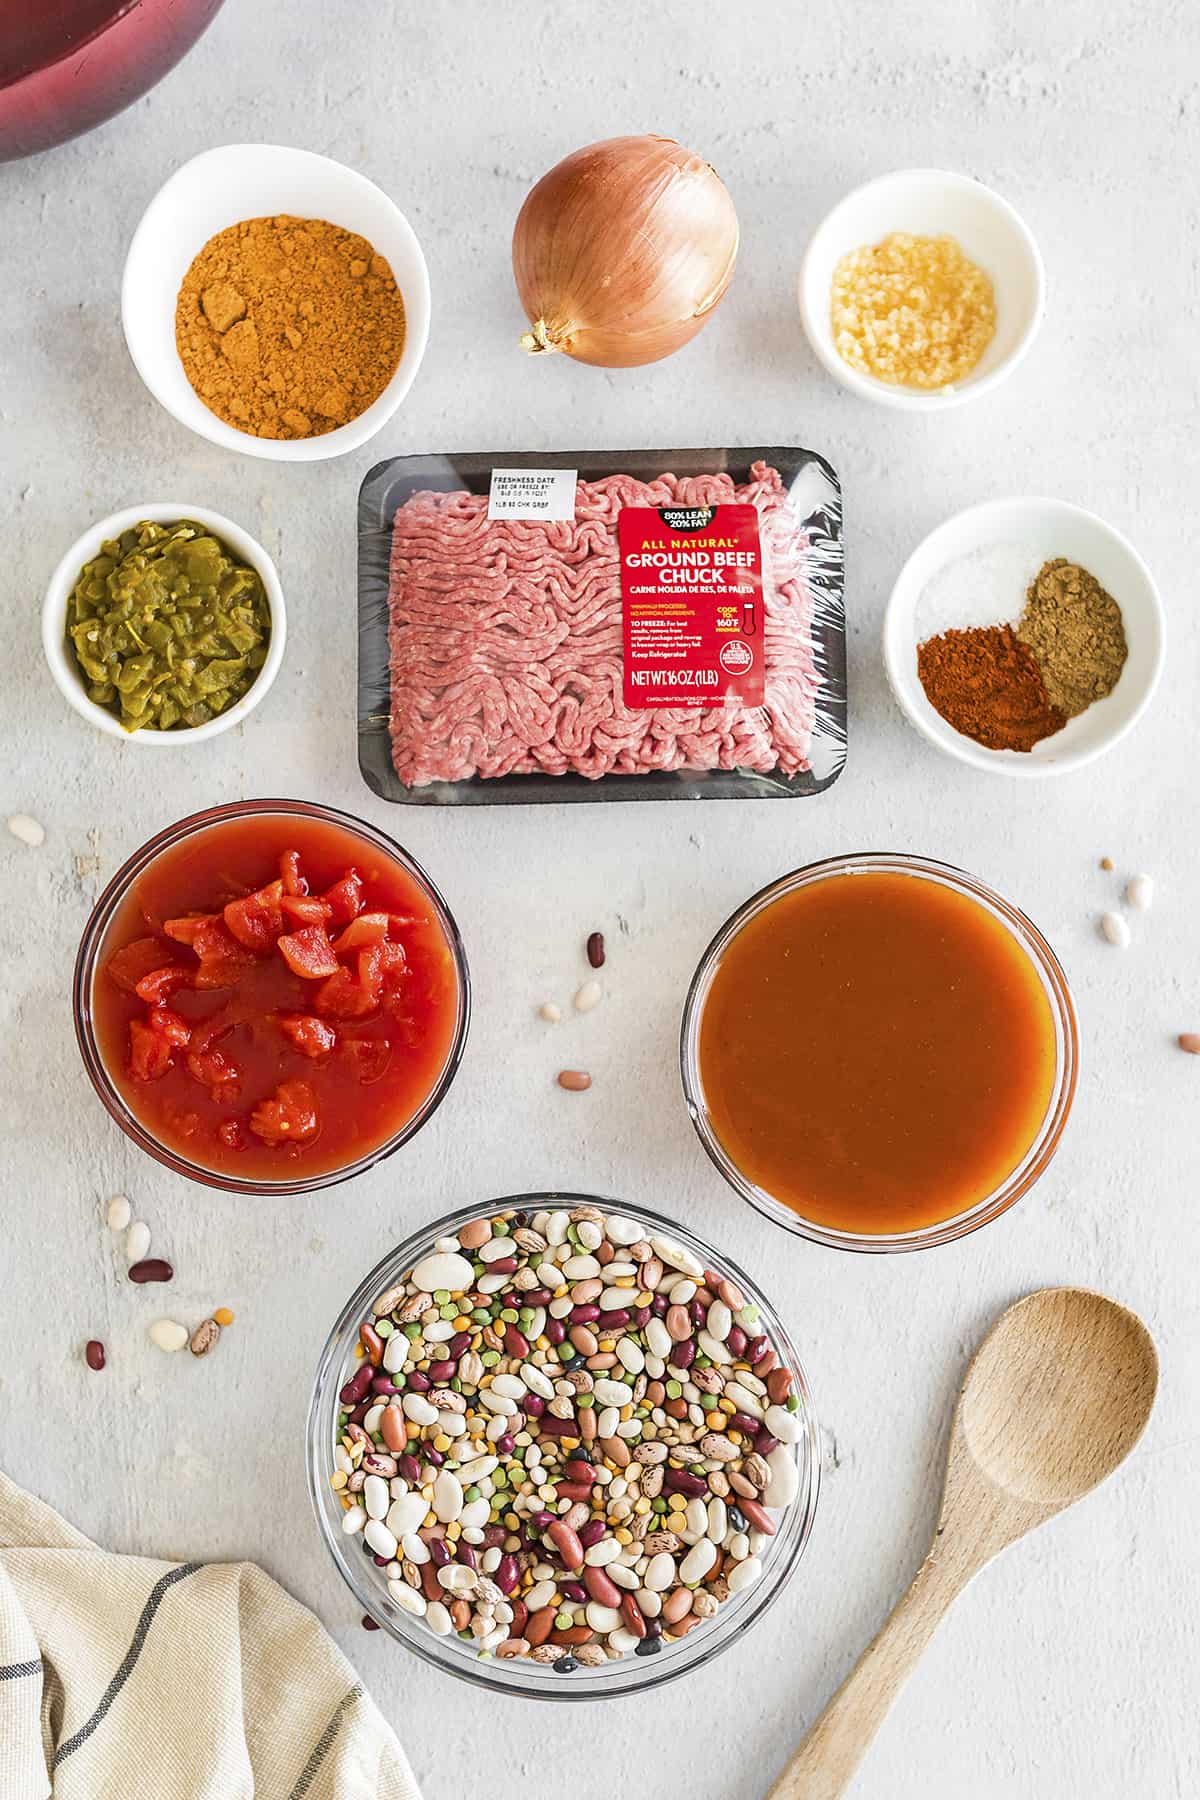 Ingredients for taco chili recipe.